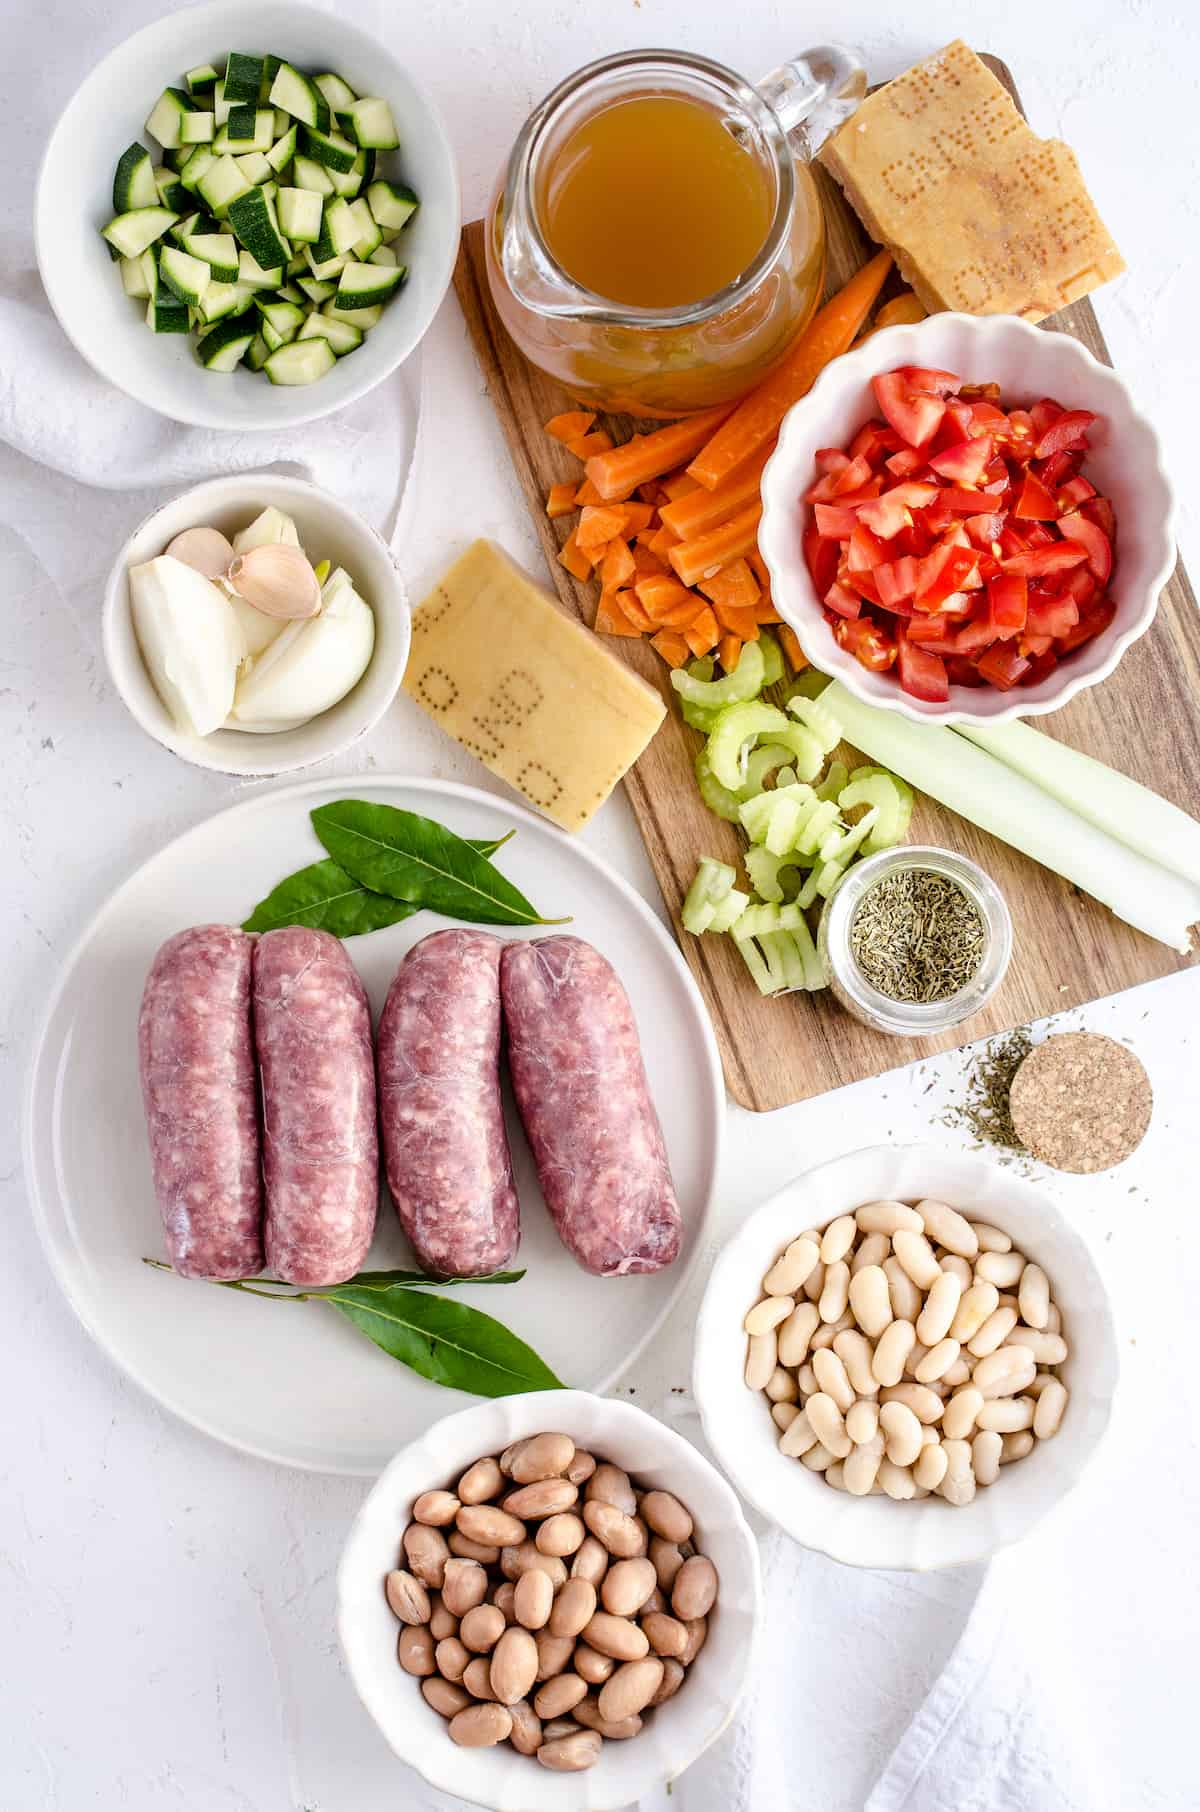 Chopped tomatoes, fresh garlic cloves, Italian sausage and the rest of the ingredients arranged on a kitchen countertop